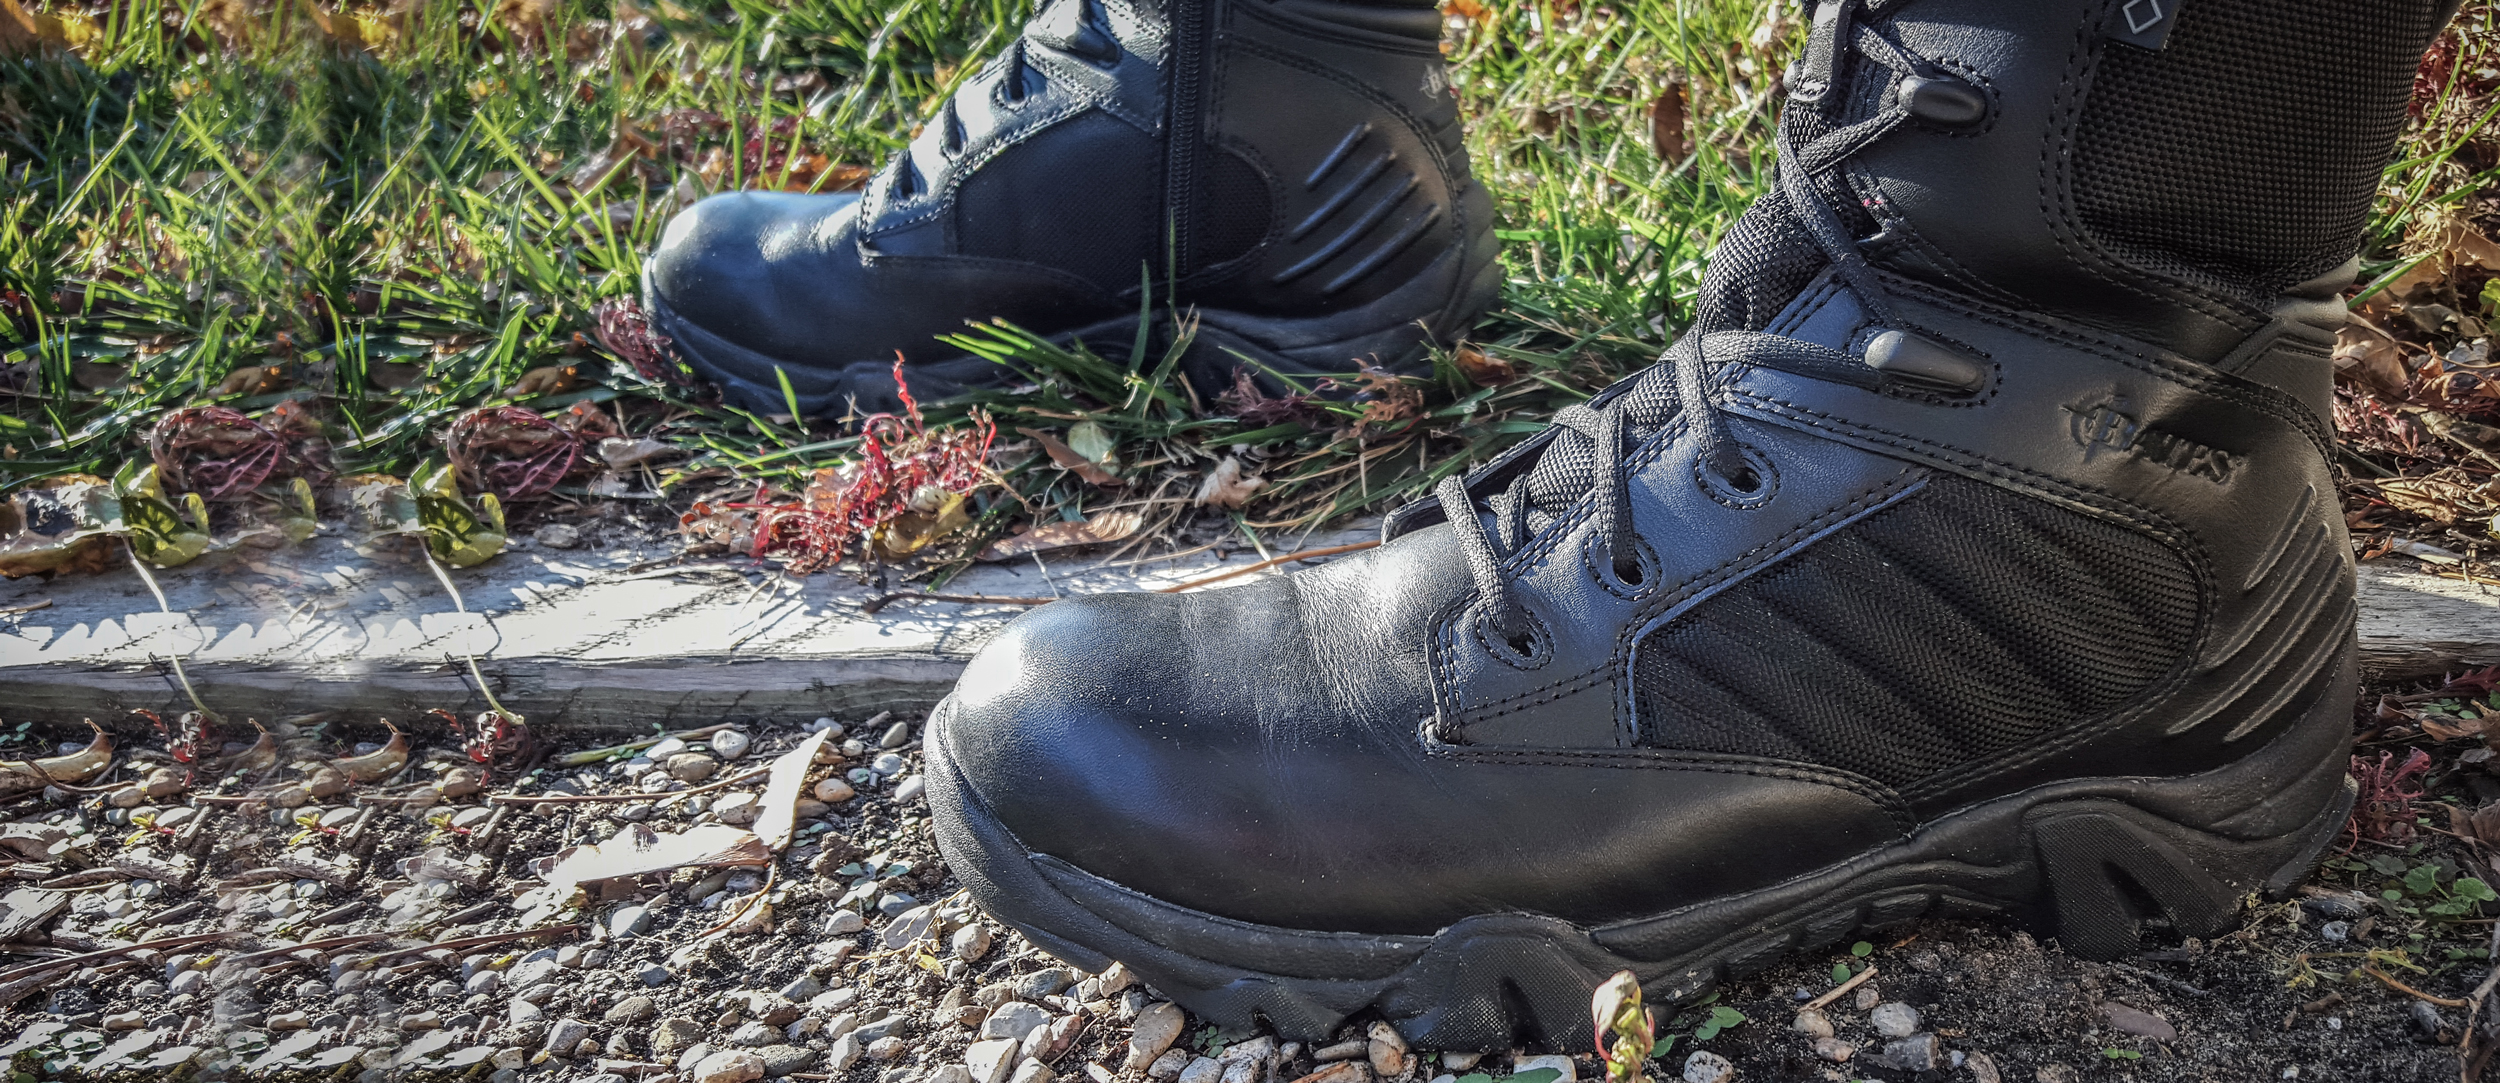 Bates GX-8 Side Zip Boot - Gear Review 